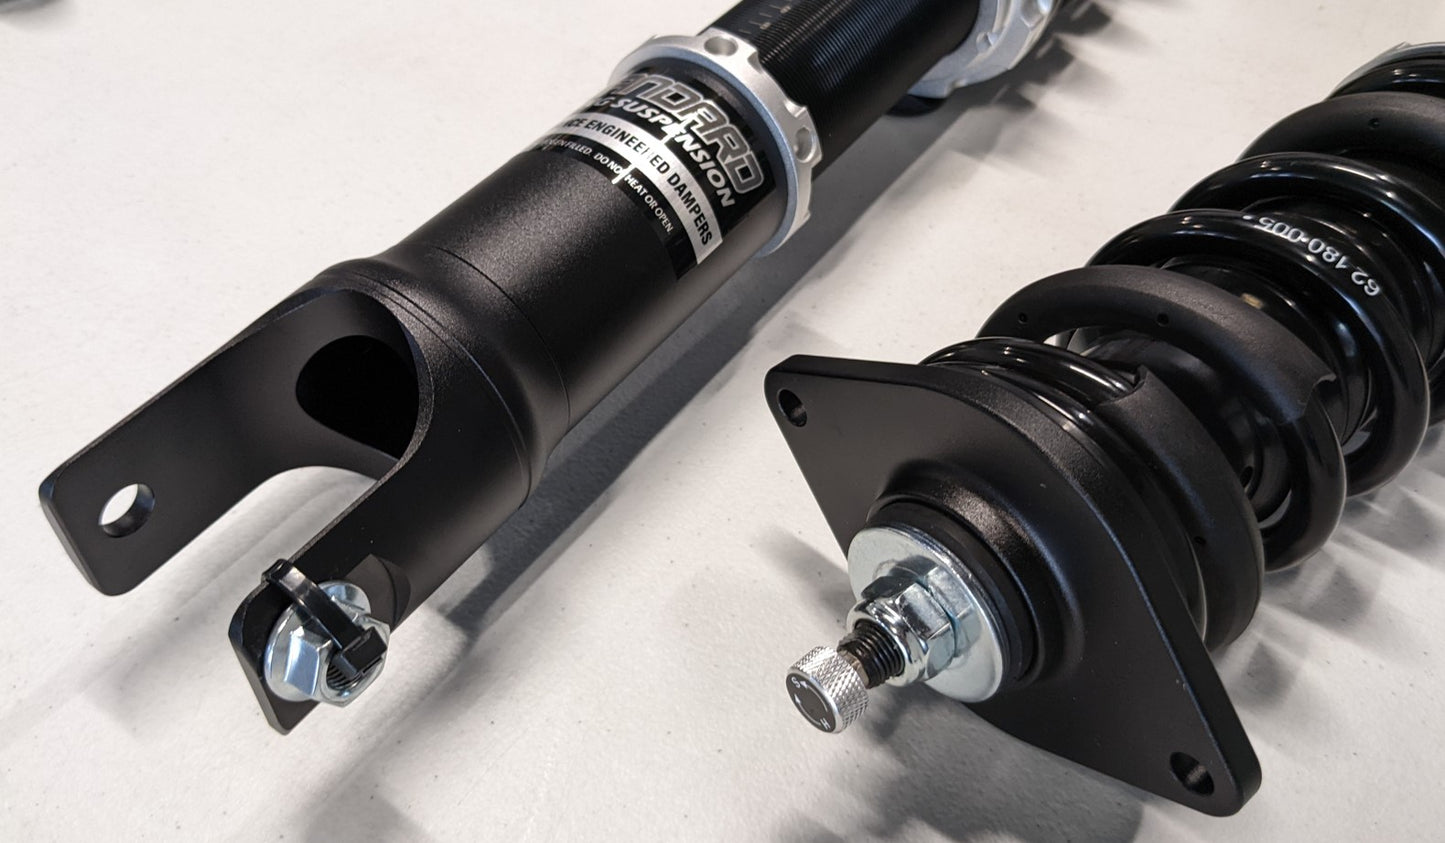 DISCONTINUED - RedShift "STANDARD" Street Coilovers